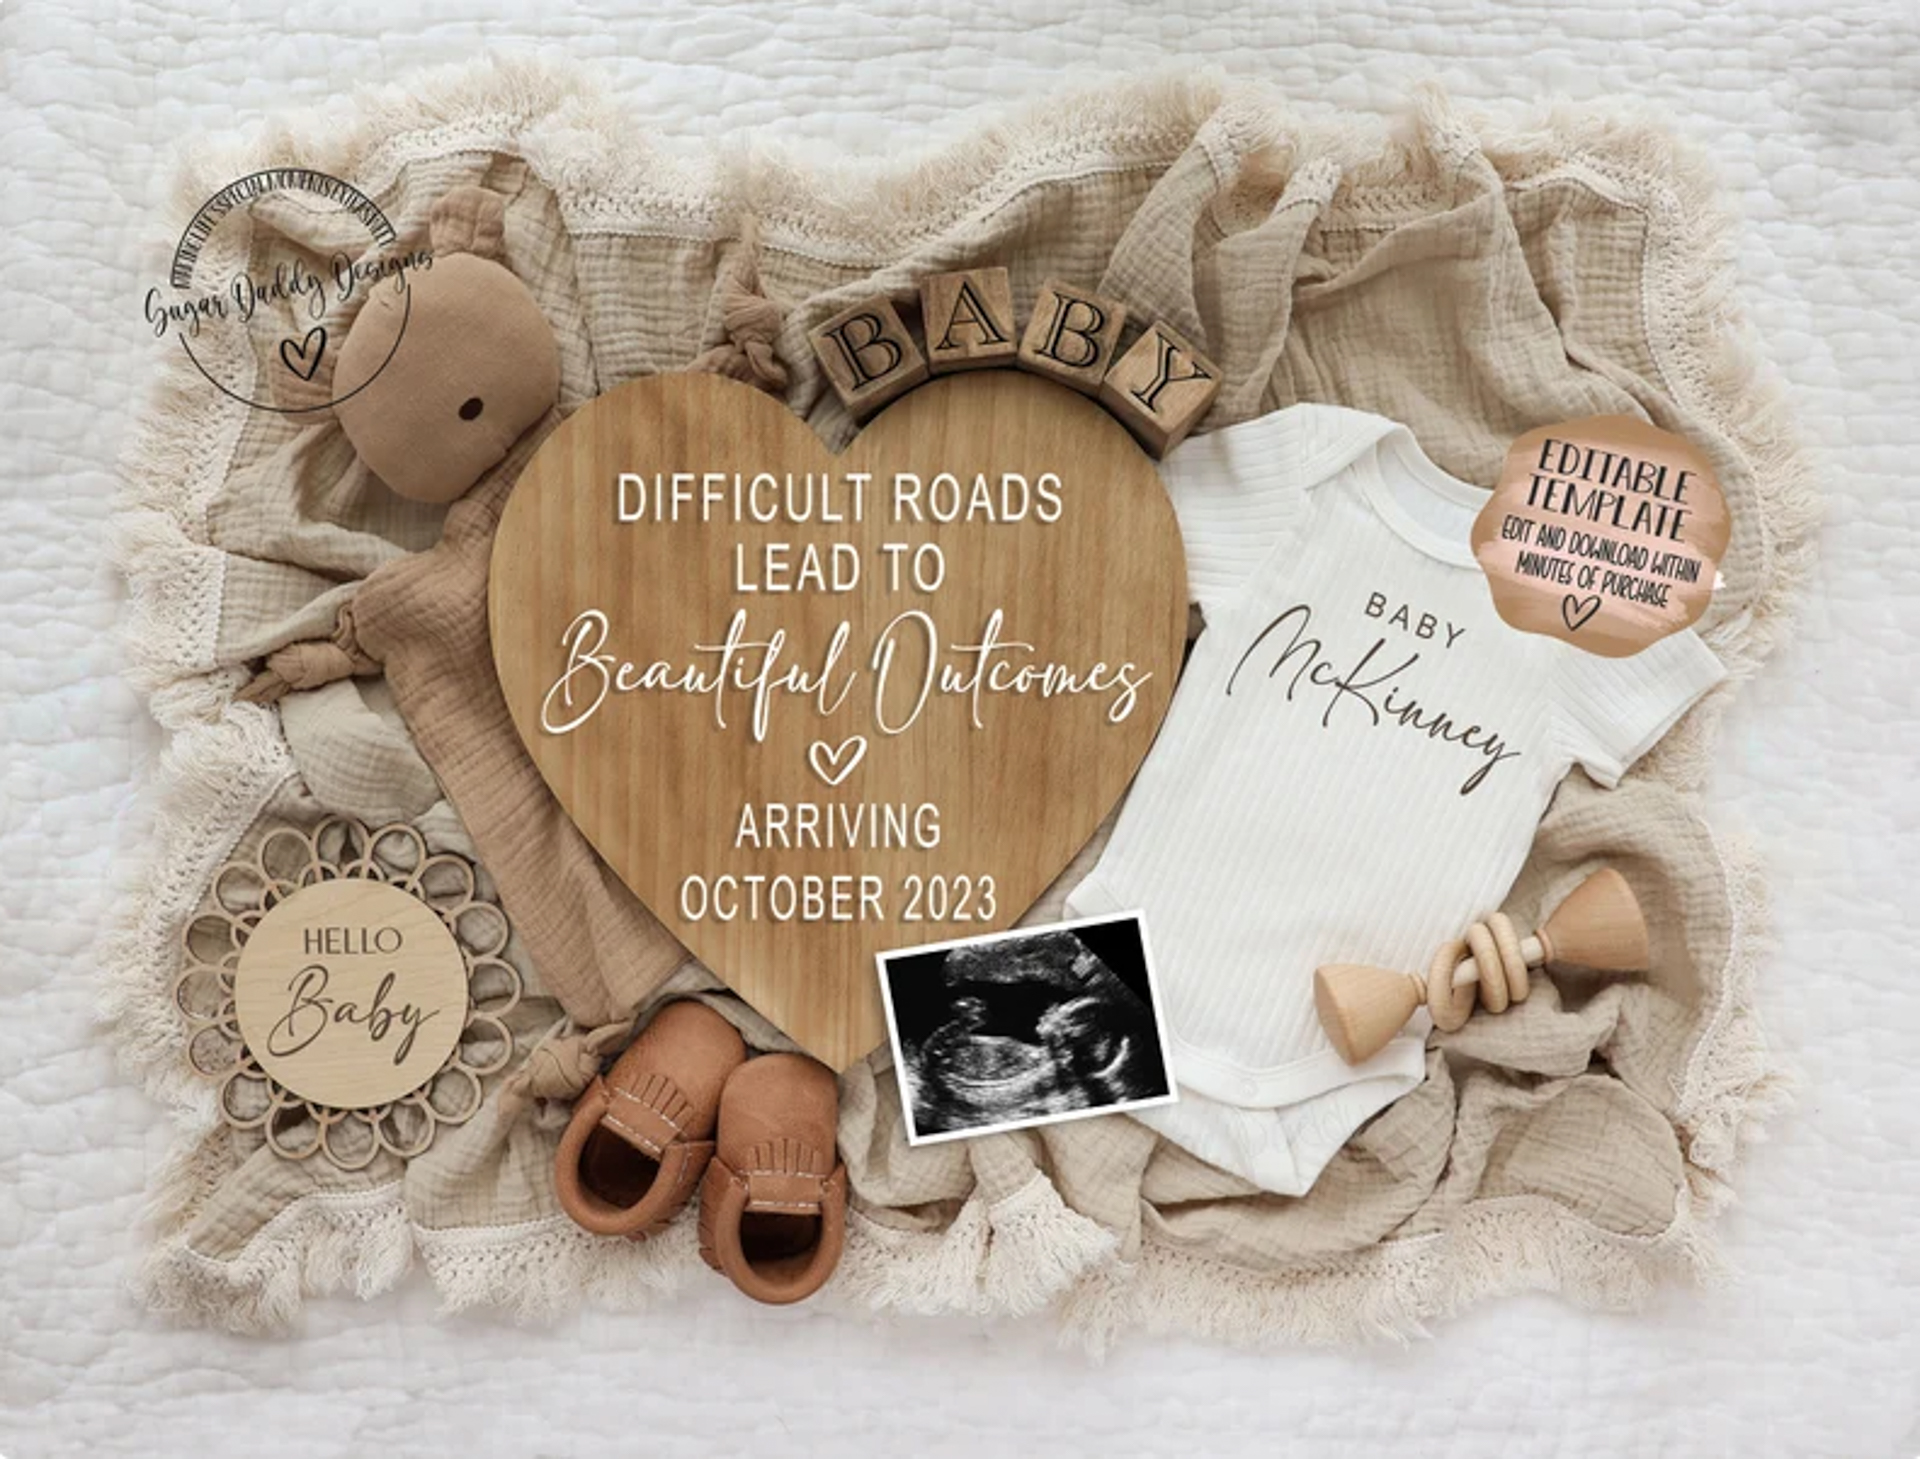 This template can be used as an IVF pregnancy announcement or a Rainbow Baby Announcement. Find more ideas in this blog post!